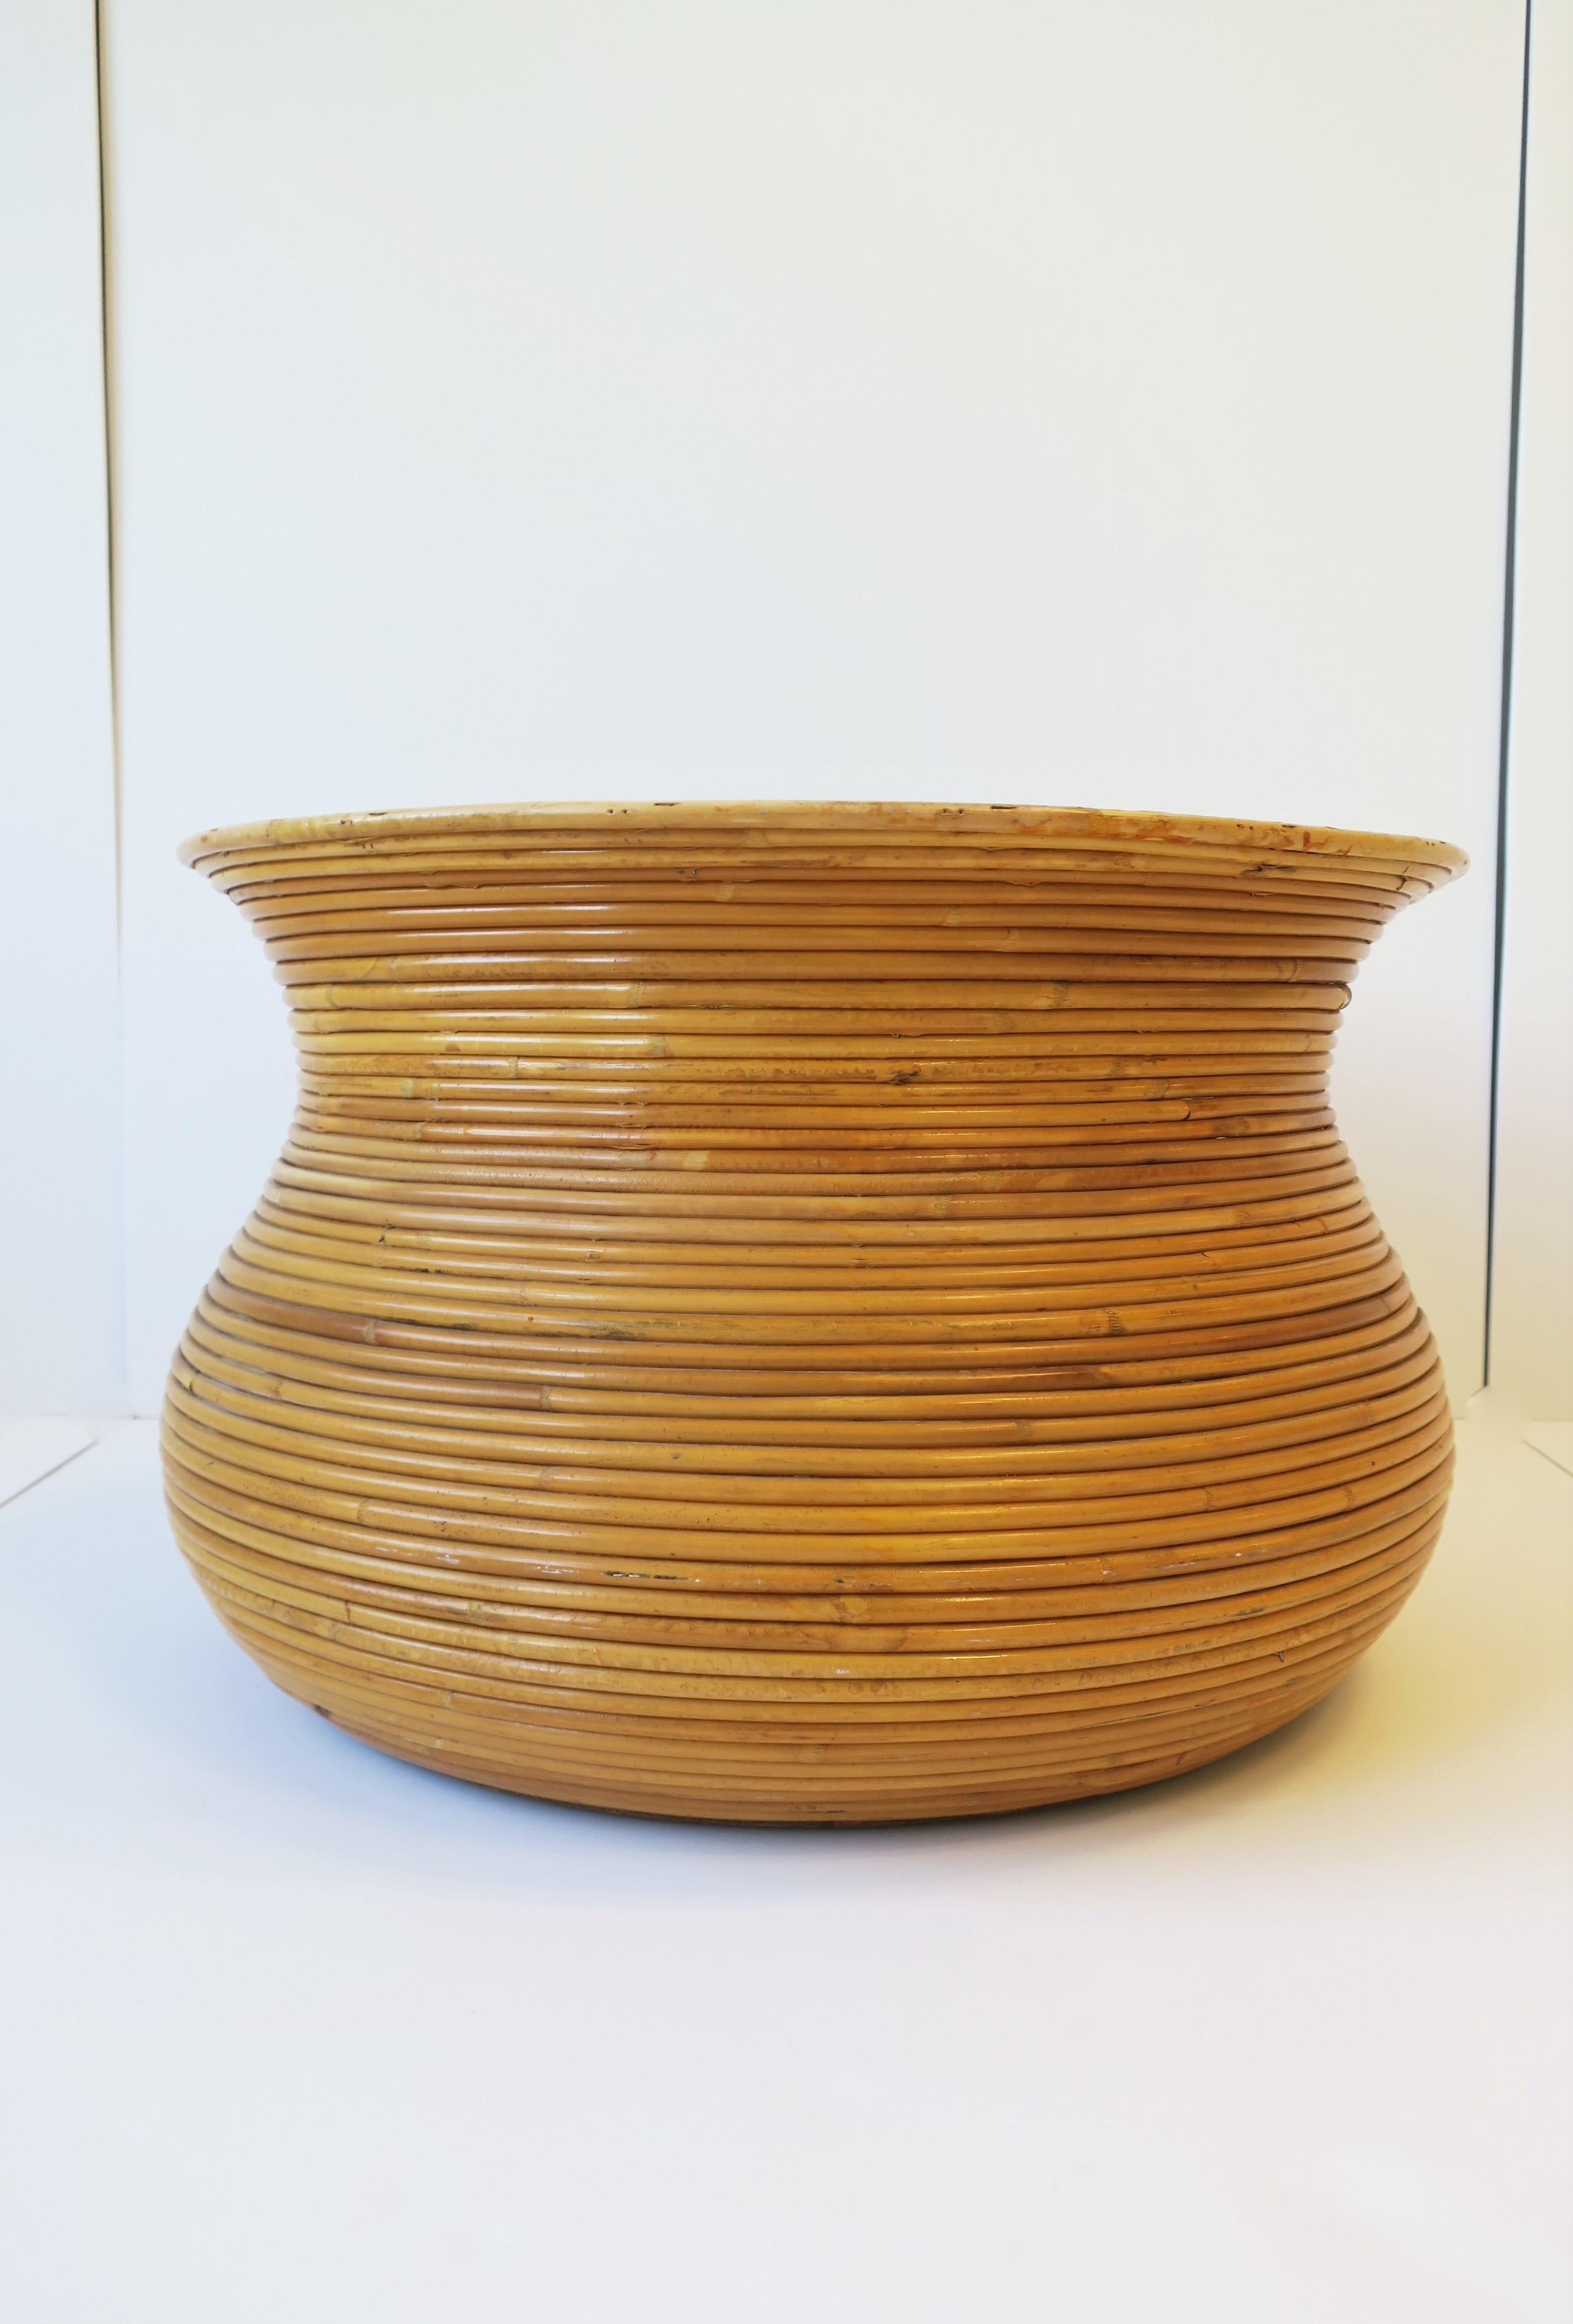 Wicker Rattan Pencil Reed Cachepot Plant Pot Holder in the Crespi Style, Large 2